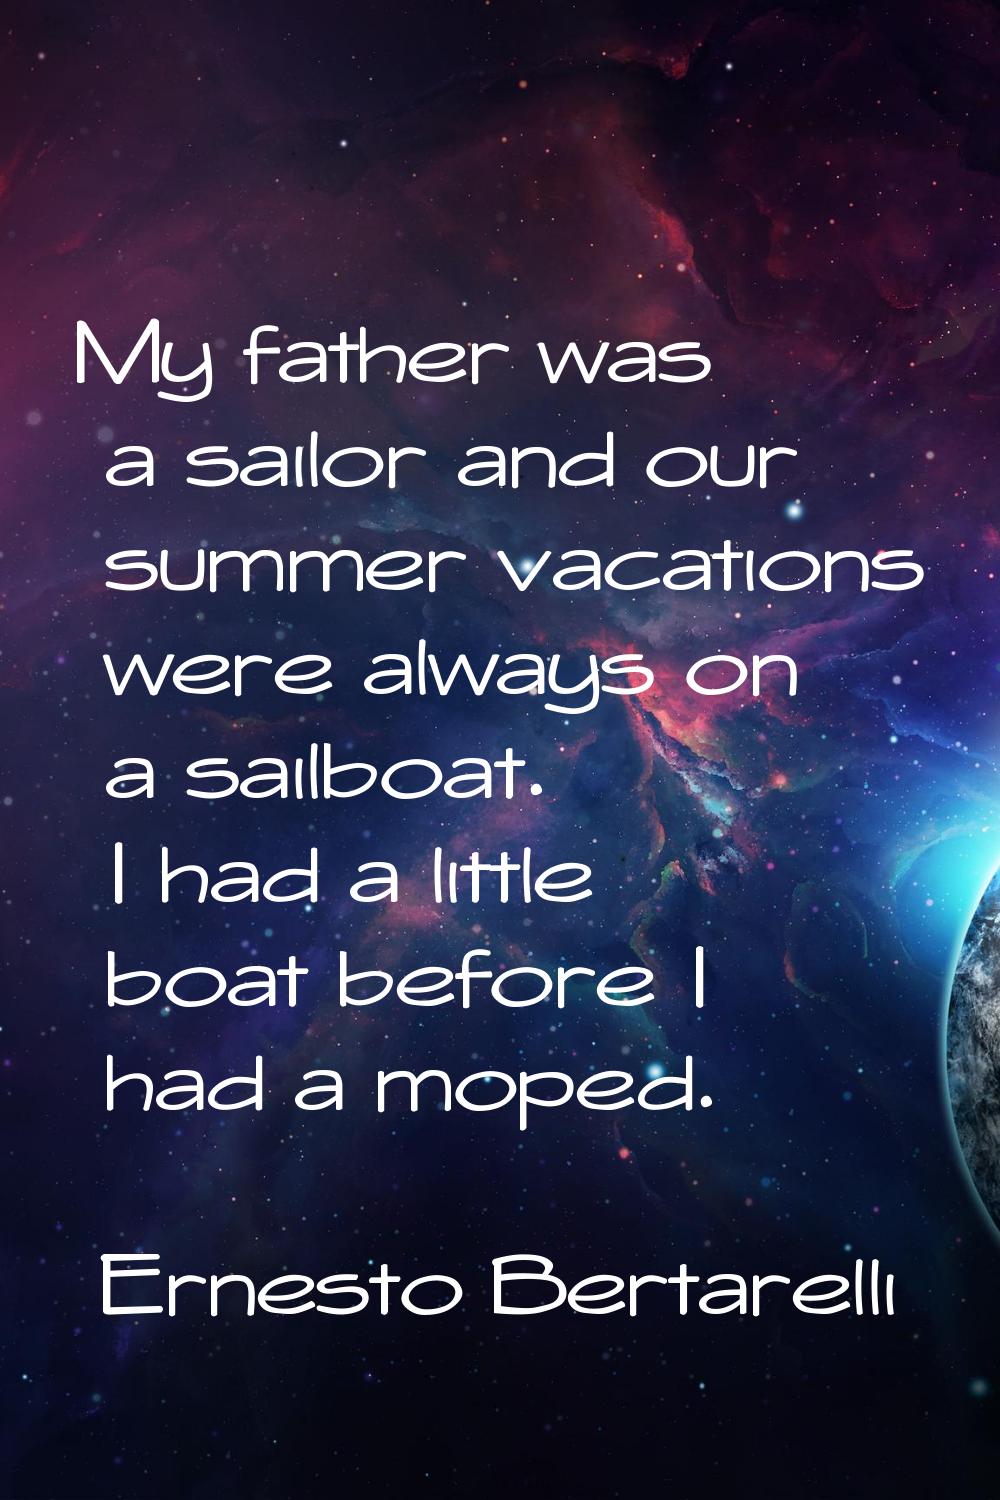 My father was a sailor and our summer vacations were always on a sailboat. I had a little boat befo